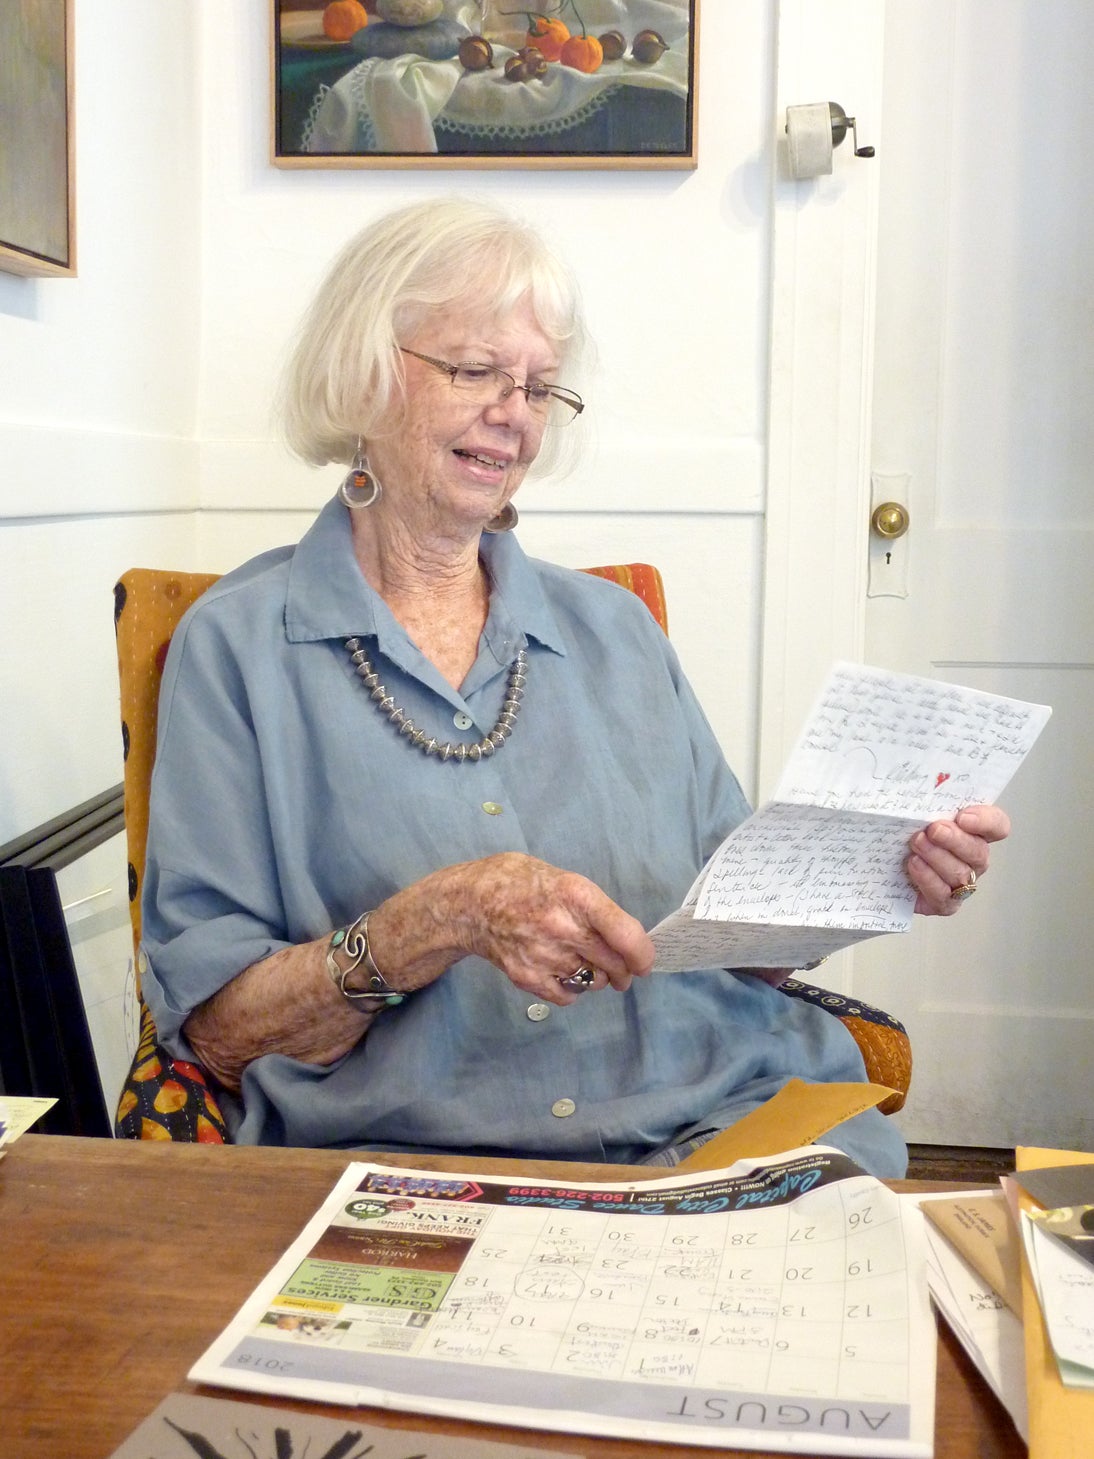 Mail art: Longtime friends Ellen Glasgow and Sandra MacDiarmid exchange handwritten letters with intricate drawings on the envelopes for more than 60 years